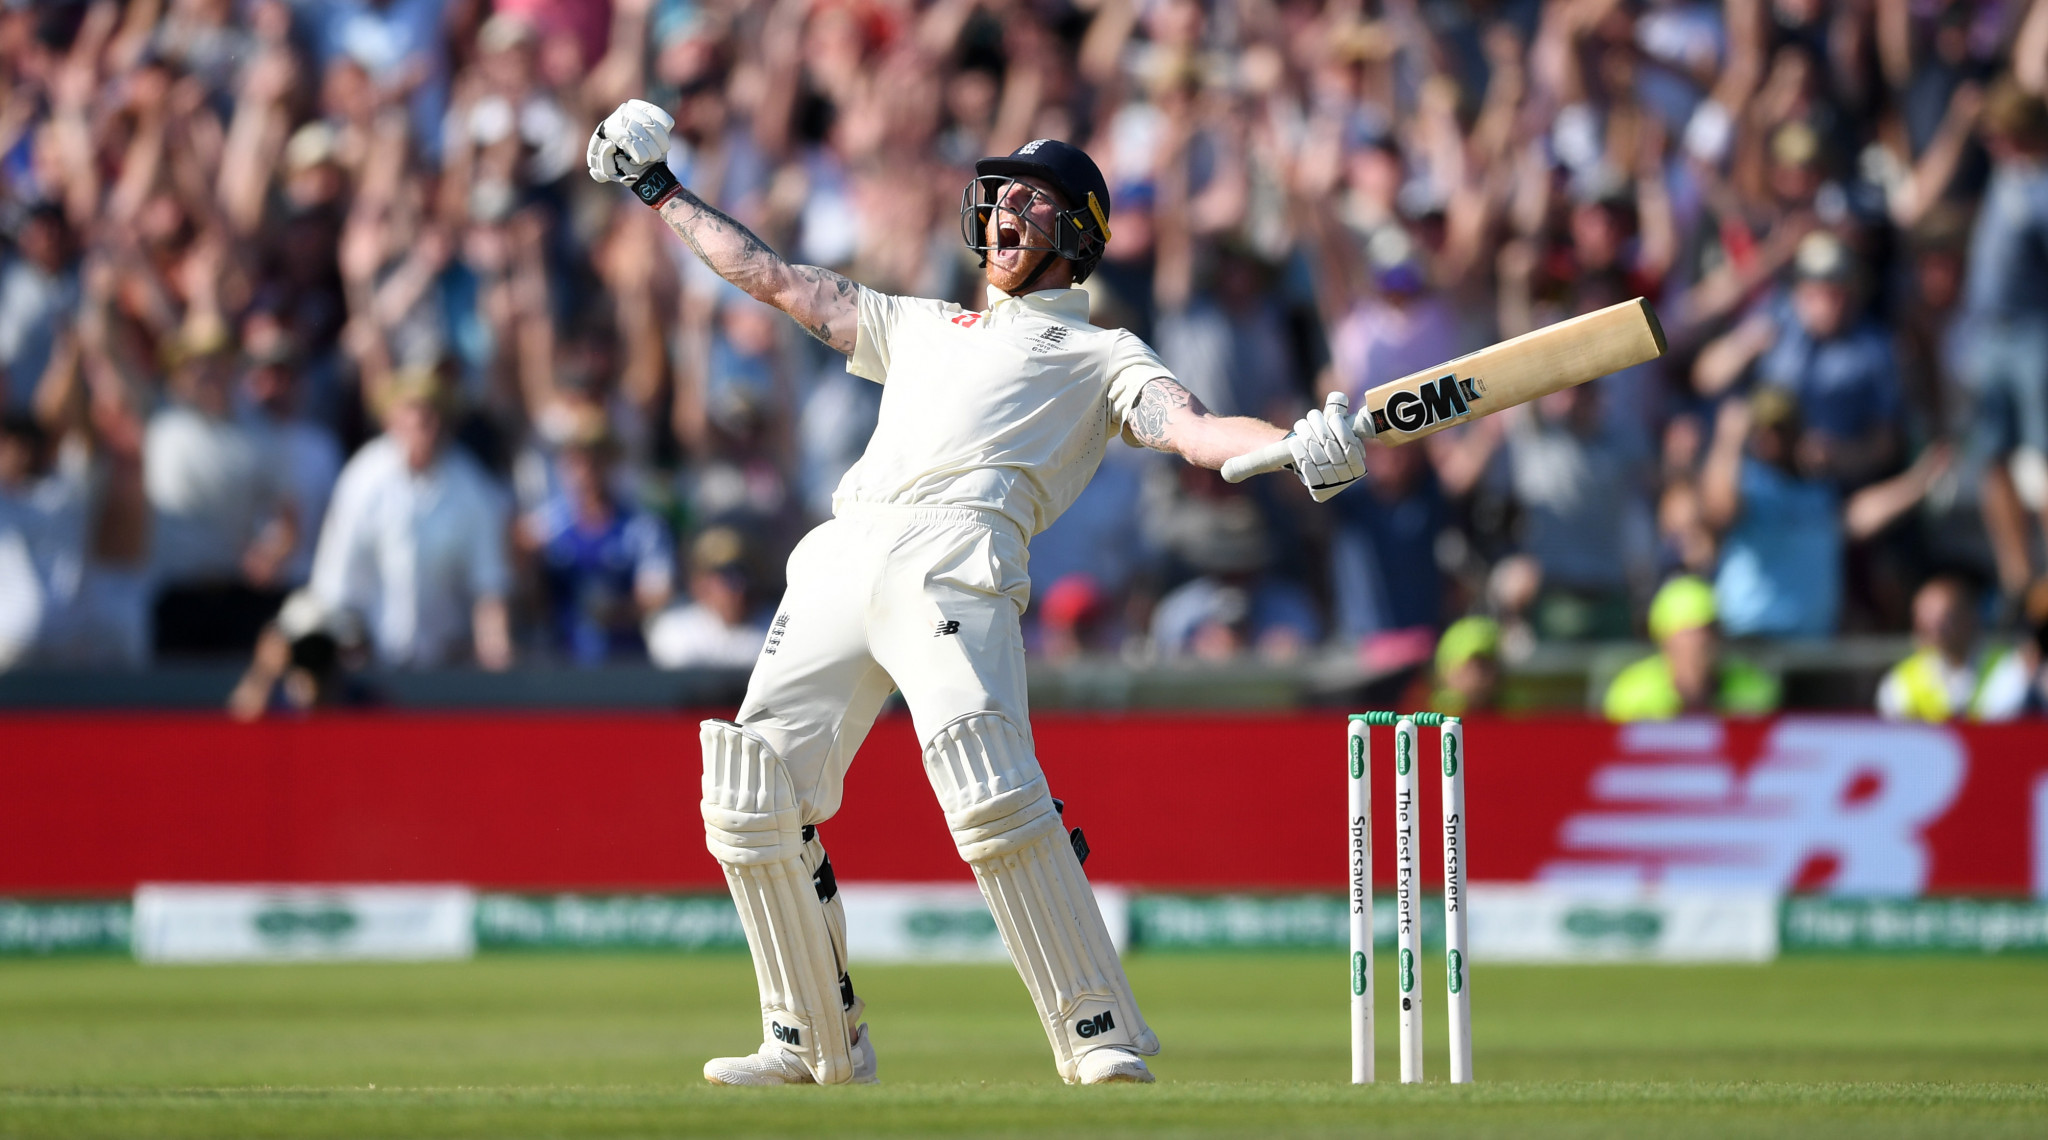 One of the iconic moments of the sporting year - Ben Stokes at Headingley, delivering England the third Ashes test almost single-handedly ©Getty Images